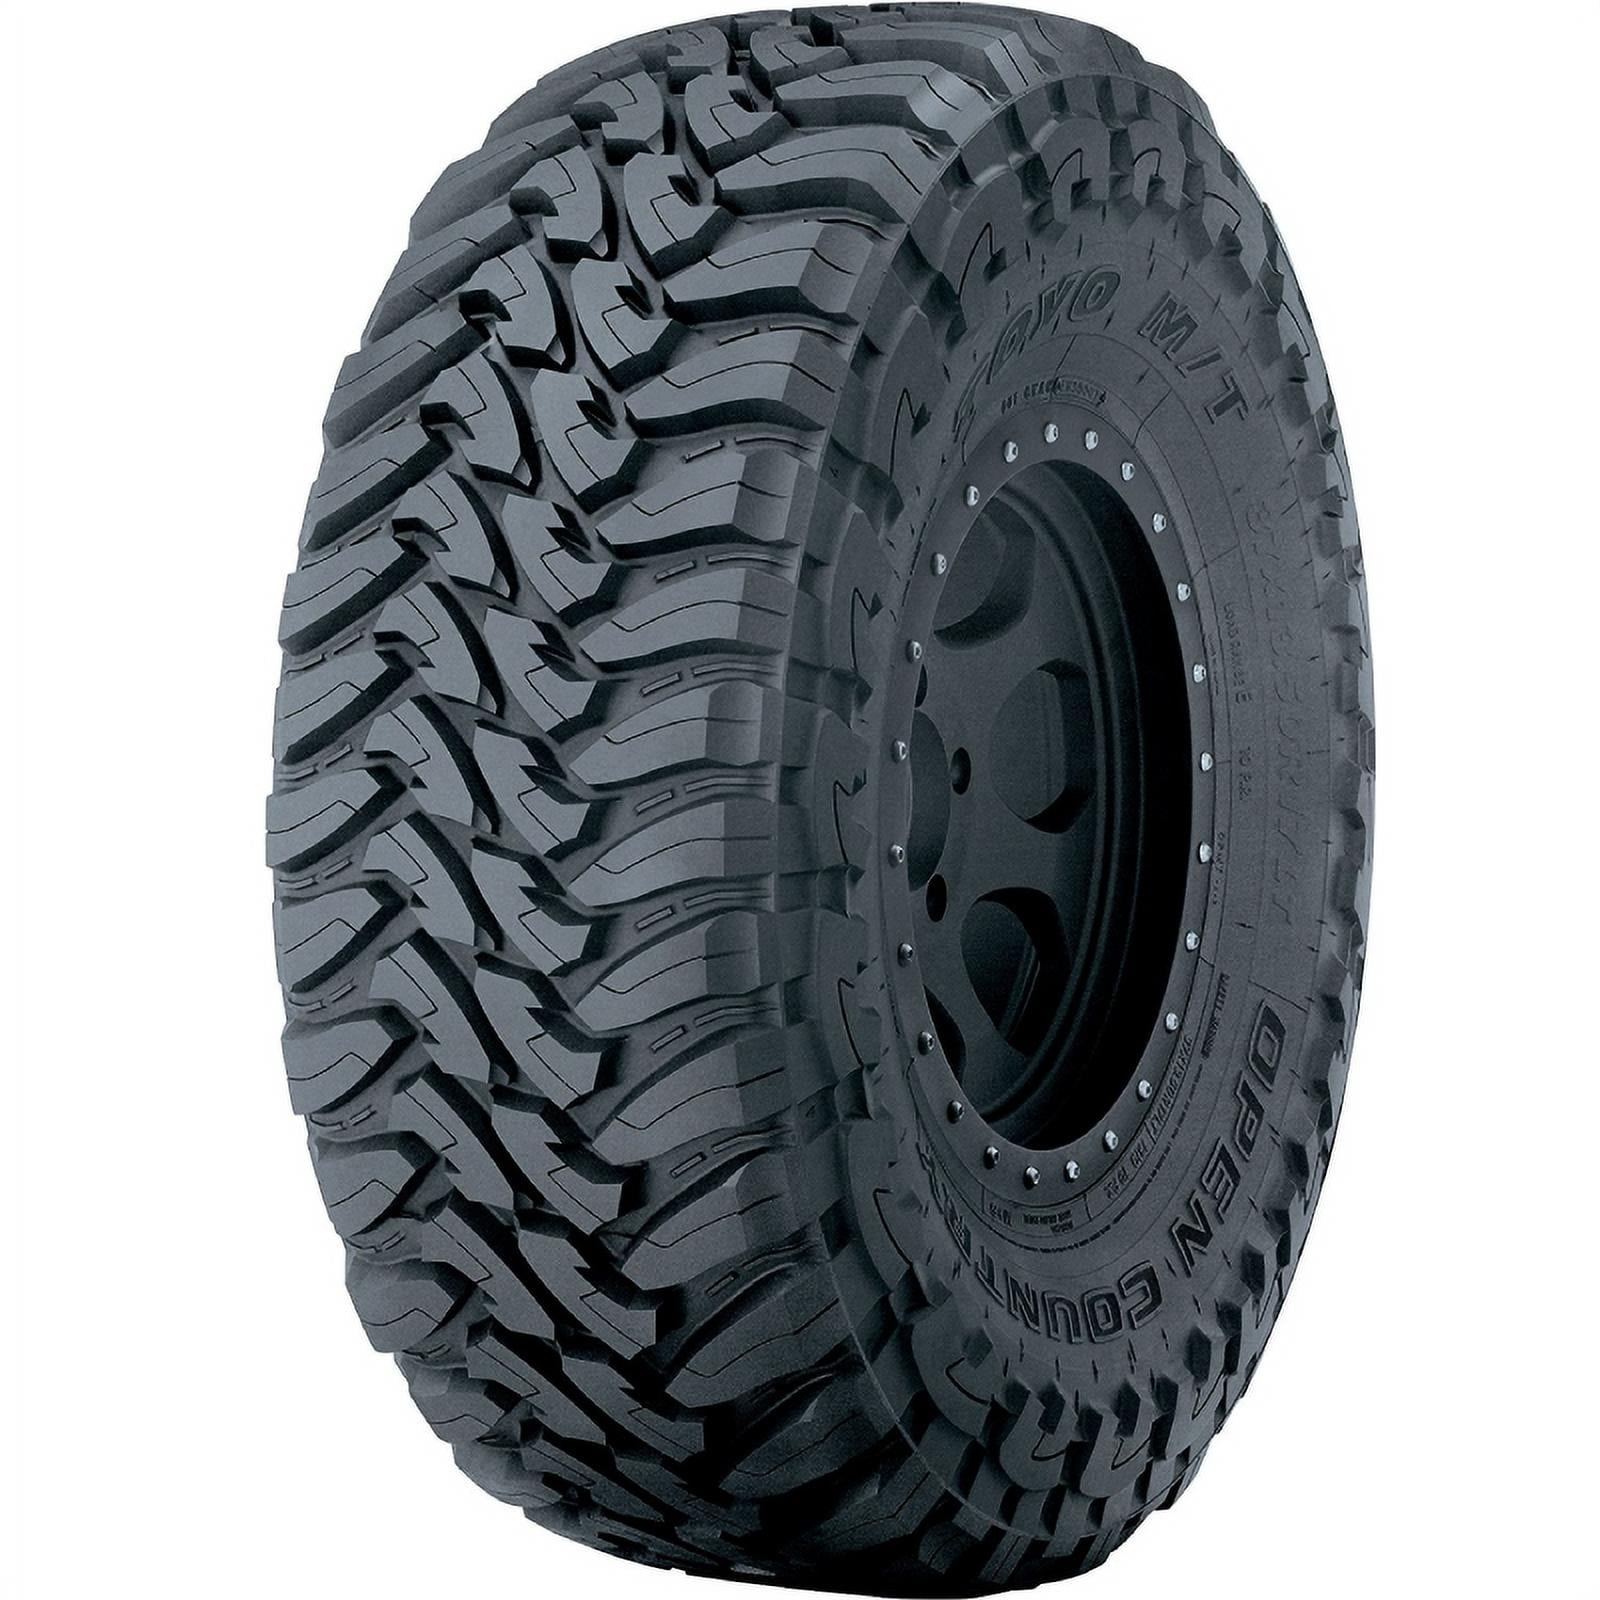 33X1250R18 118Q Toyo OPEN COUNTRY M/T All-Terrain Radial Tire 